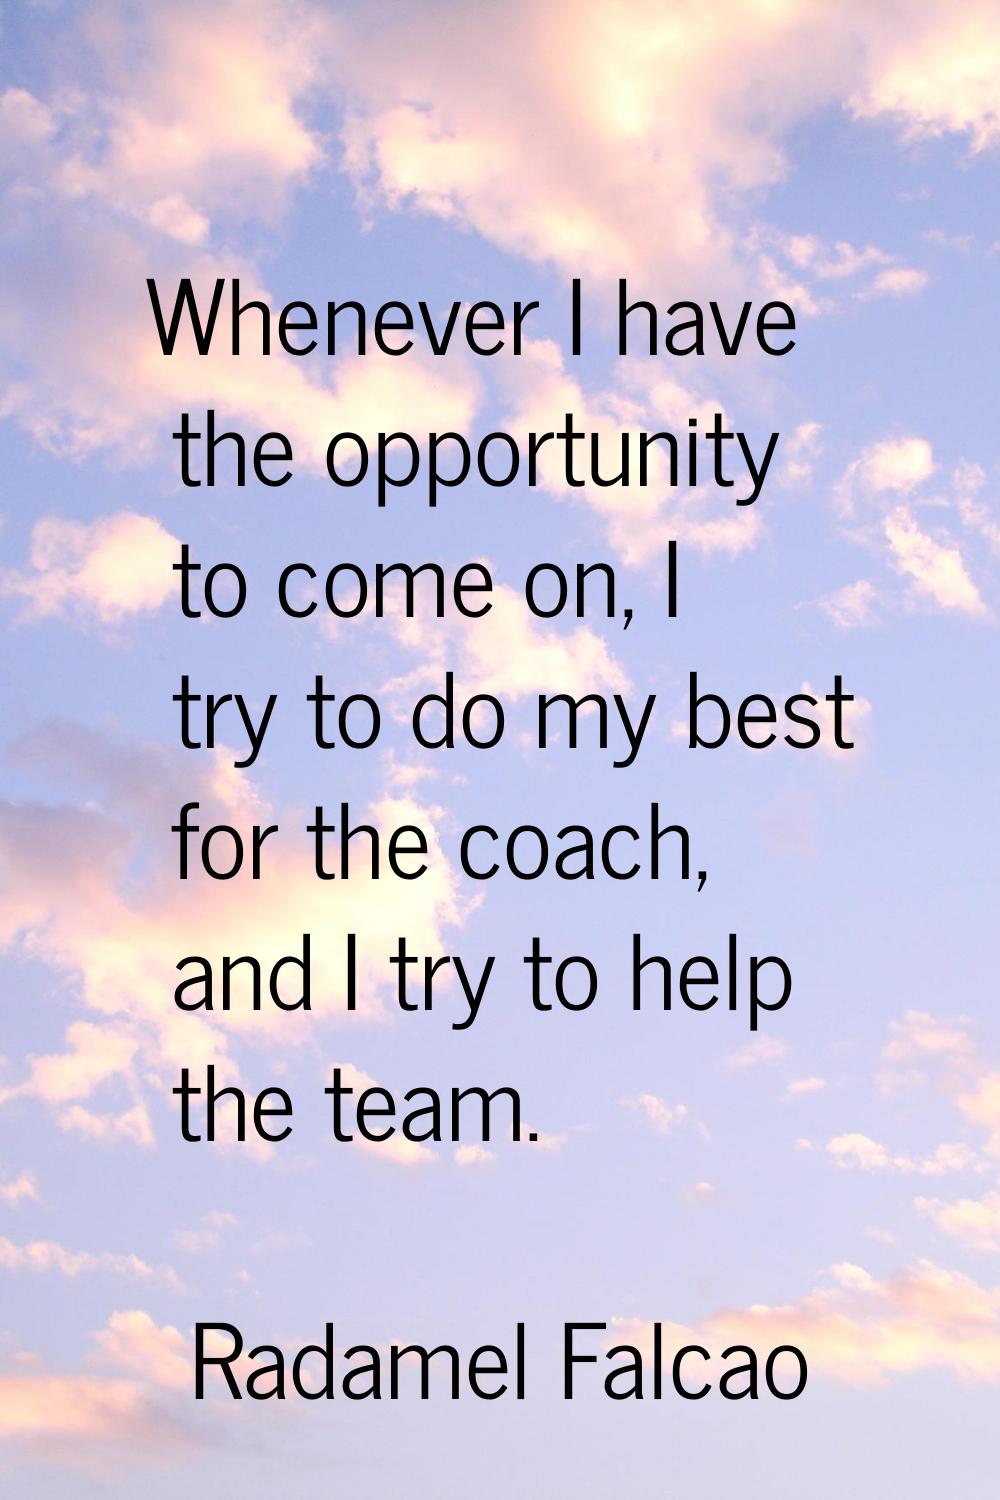 Whenever I have the opportunity to come on, I try to do my best for the coach, and I try to help th